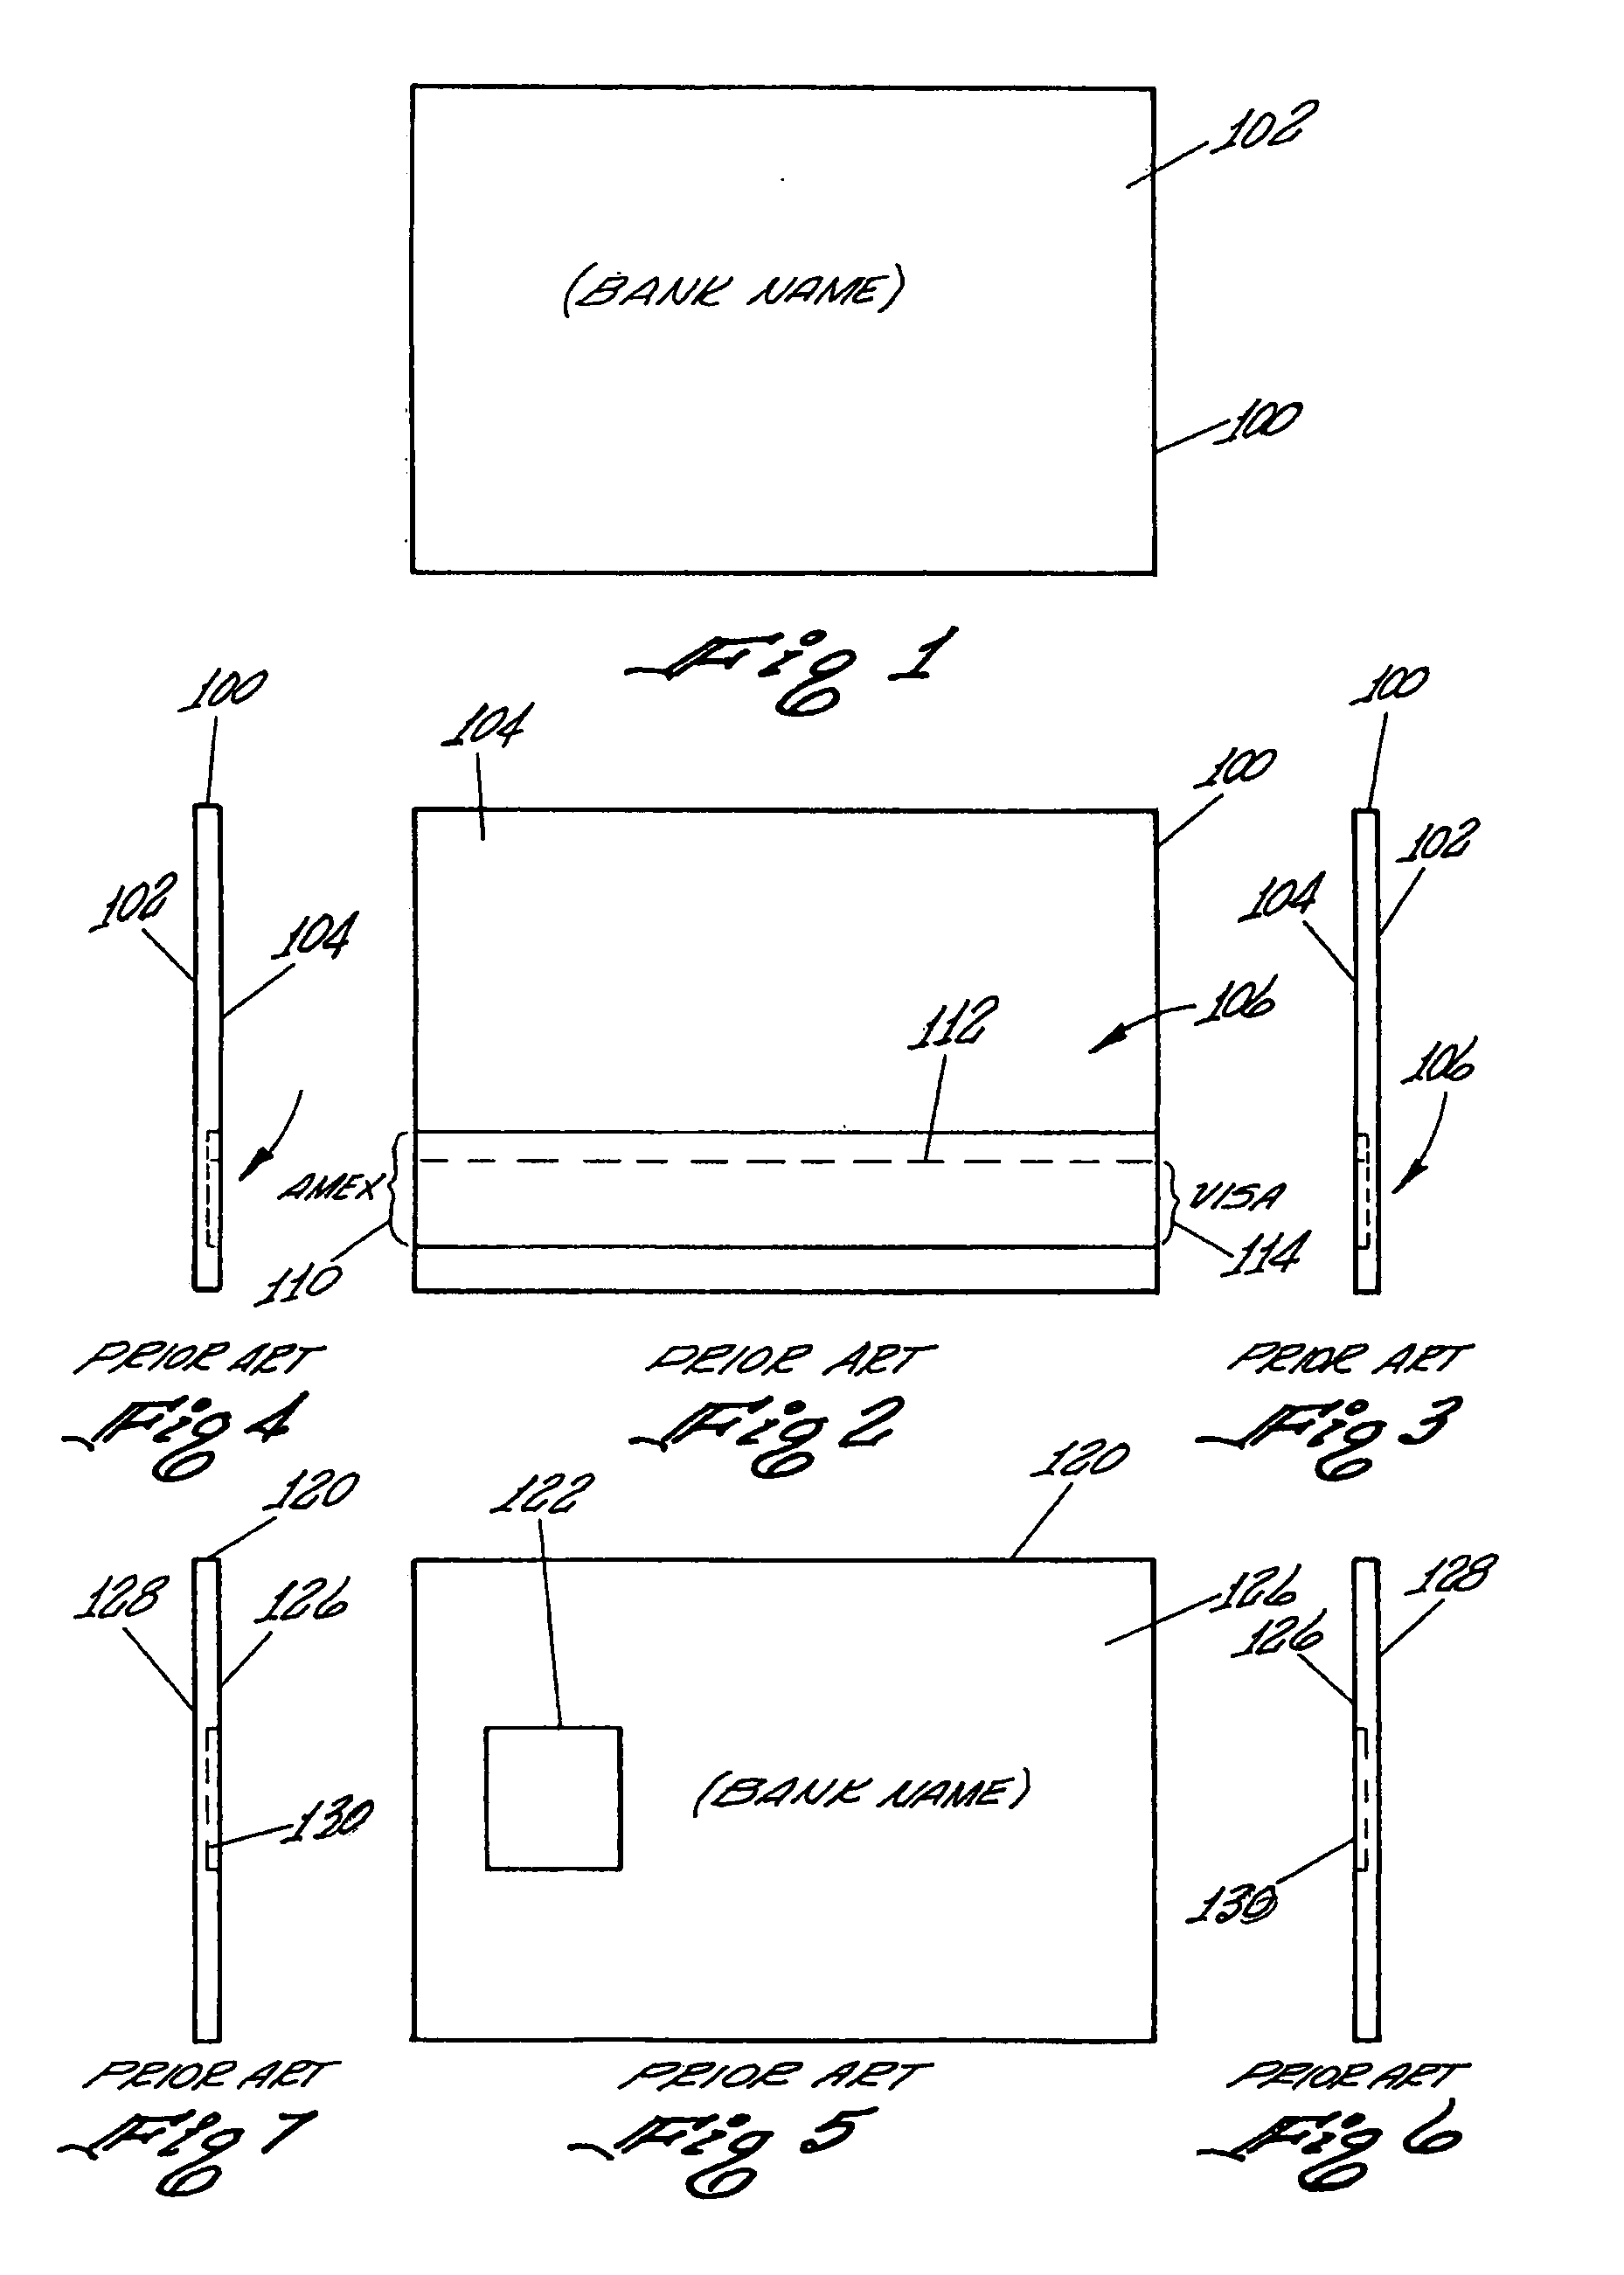 Data storage device apparatus and method for using same